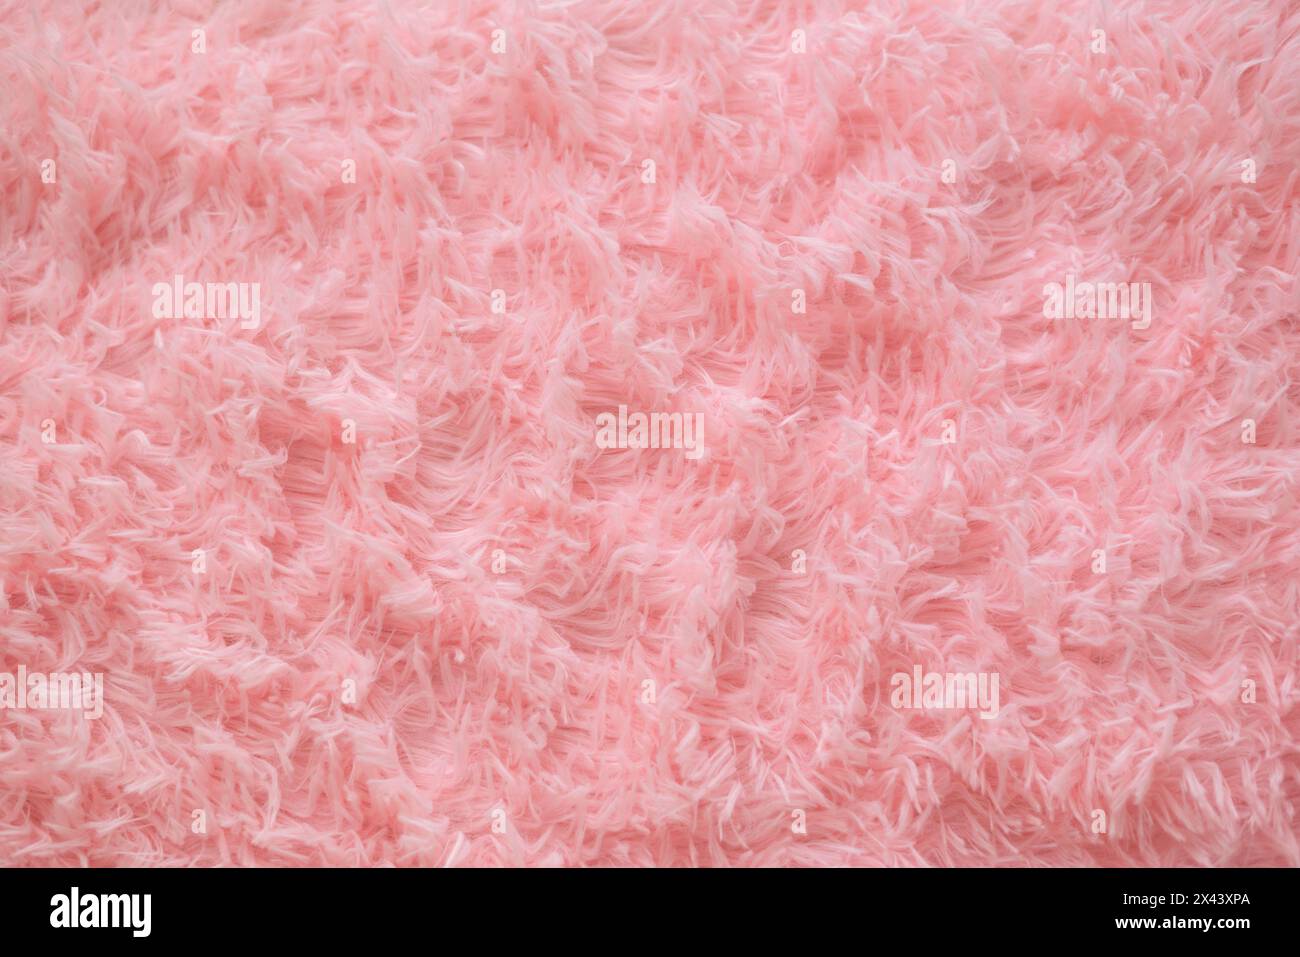 Close up pink fur texture or carpet for background. High quality photo Stock Photo